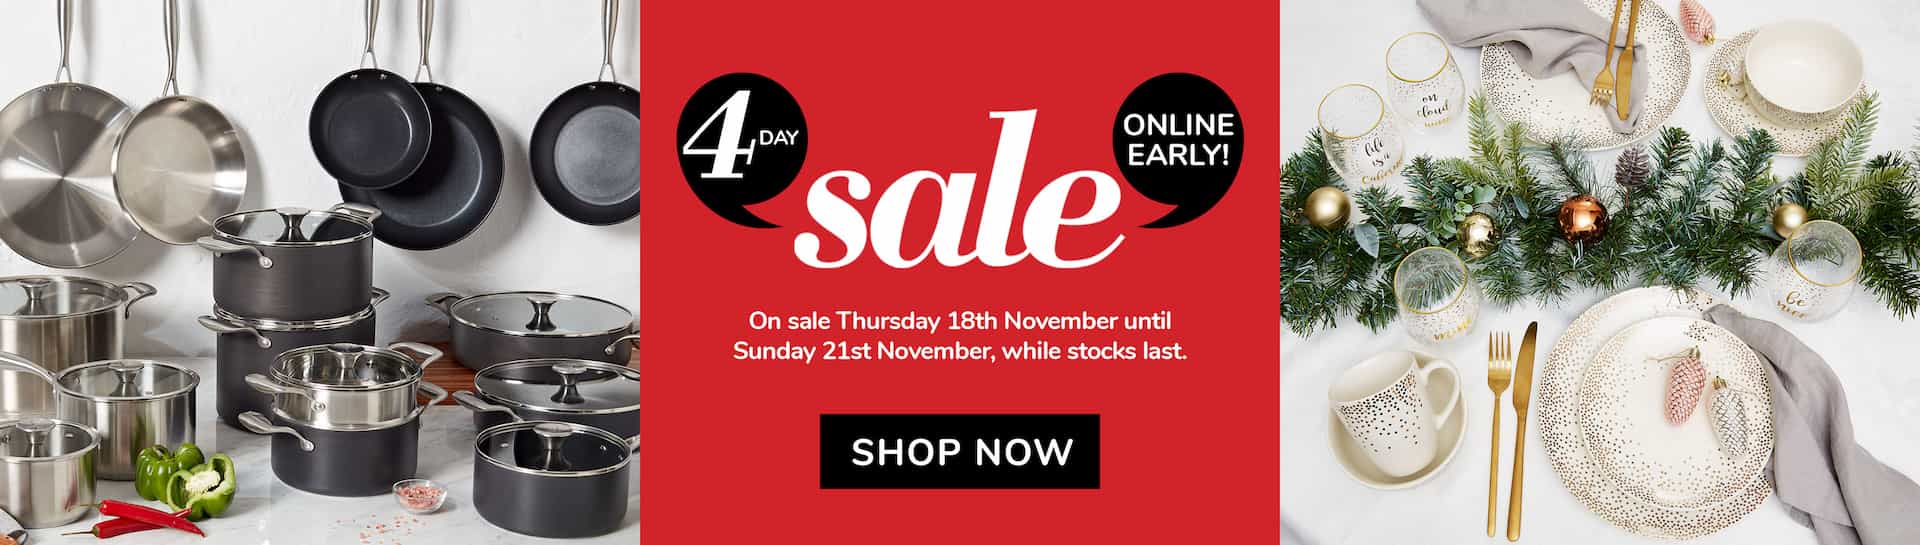 4 Day sale - Up to 50% OFF on clothing, appliances, footwear & more at Harris Scarfe